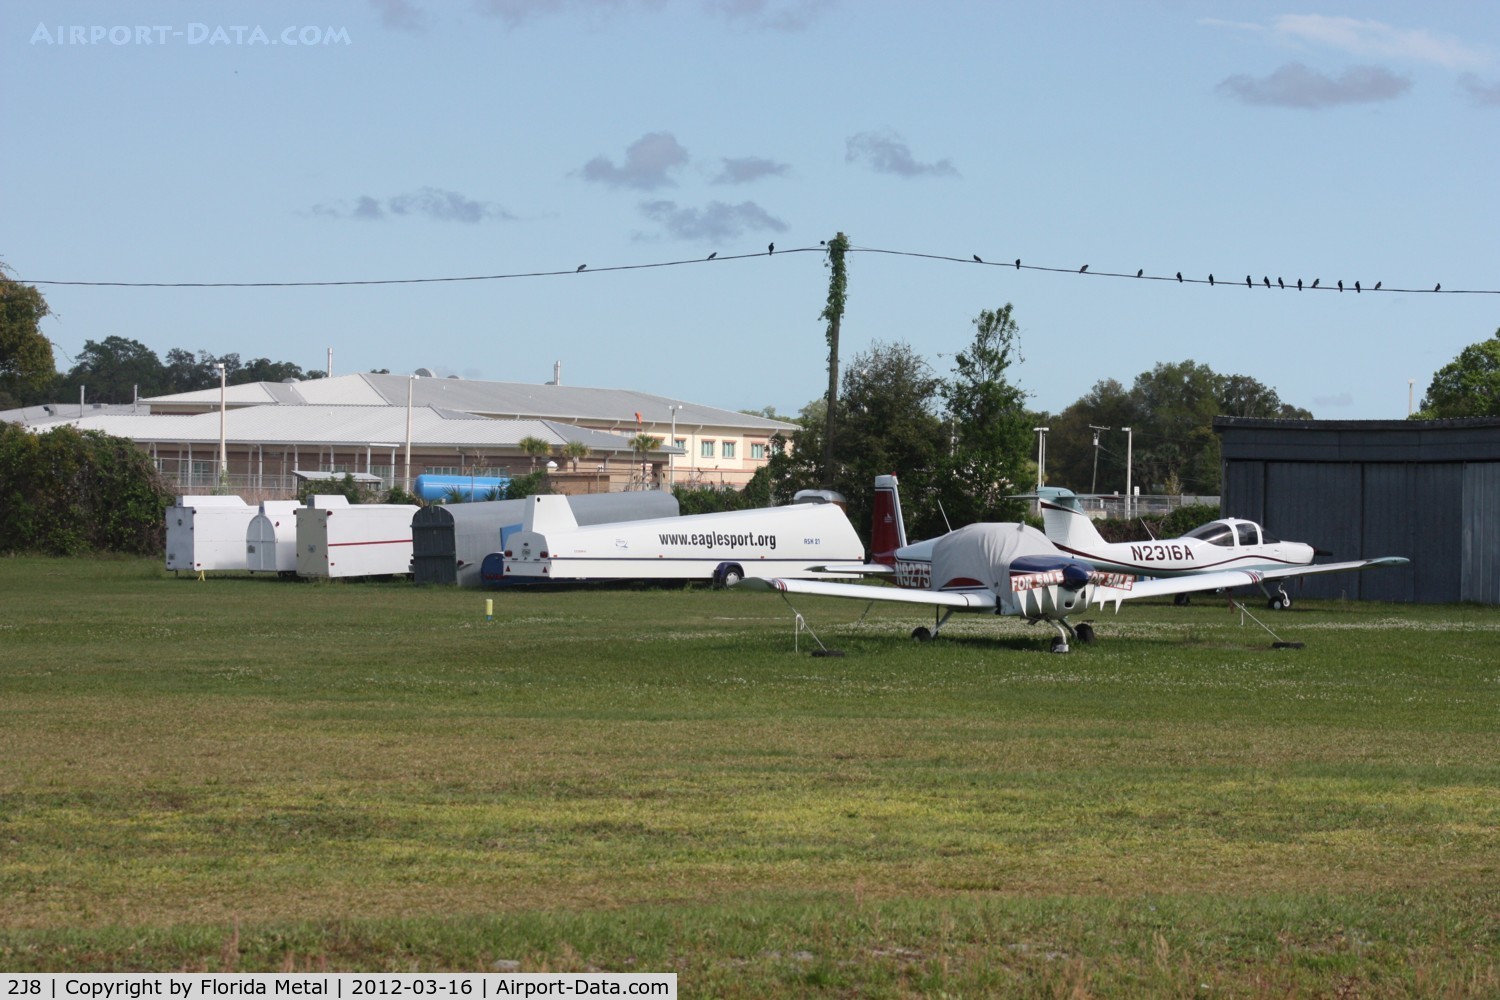 Pierson Municipal Airport (2J8) - Airport so small it doesn't have any buildings, just a few glider trailers